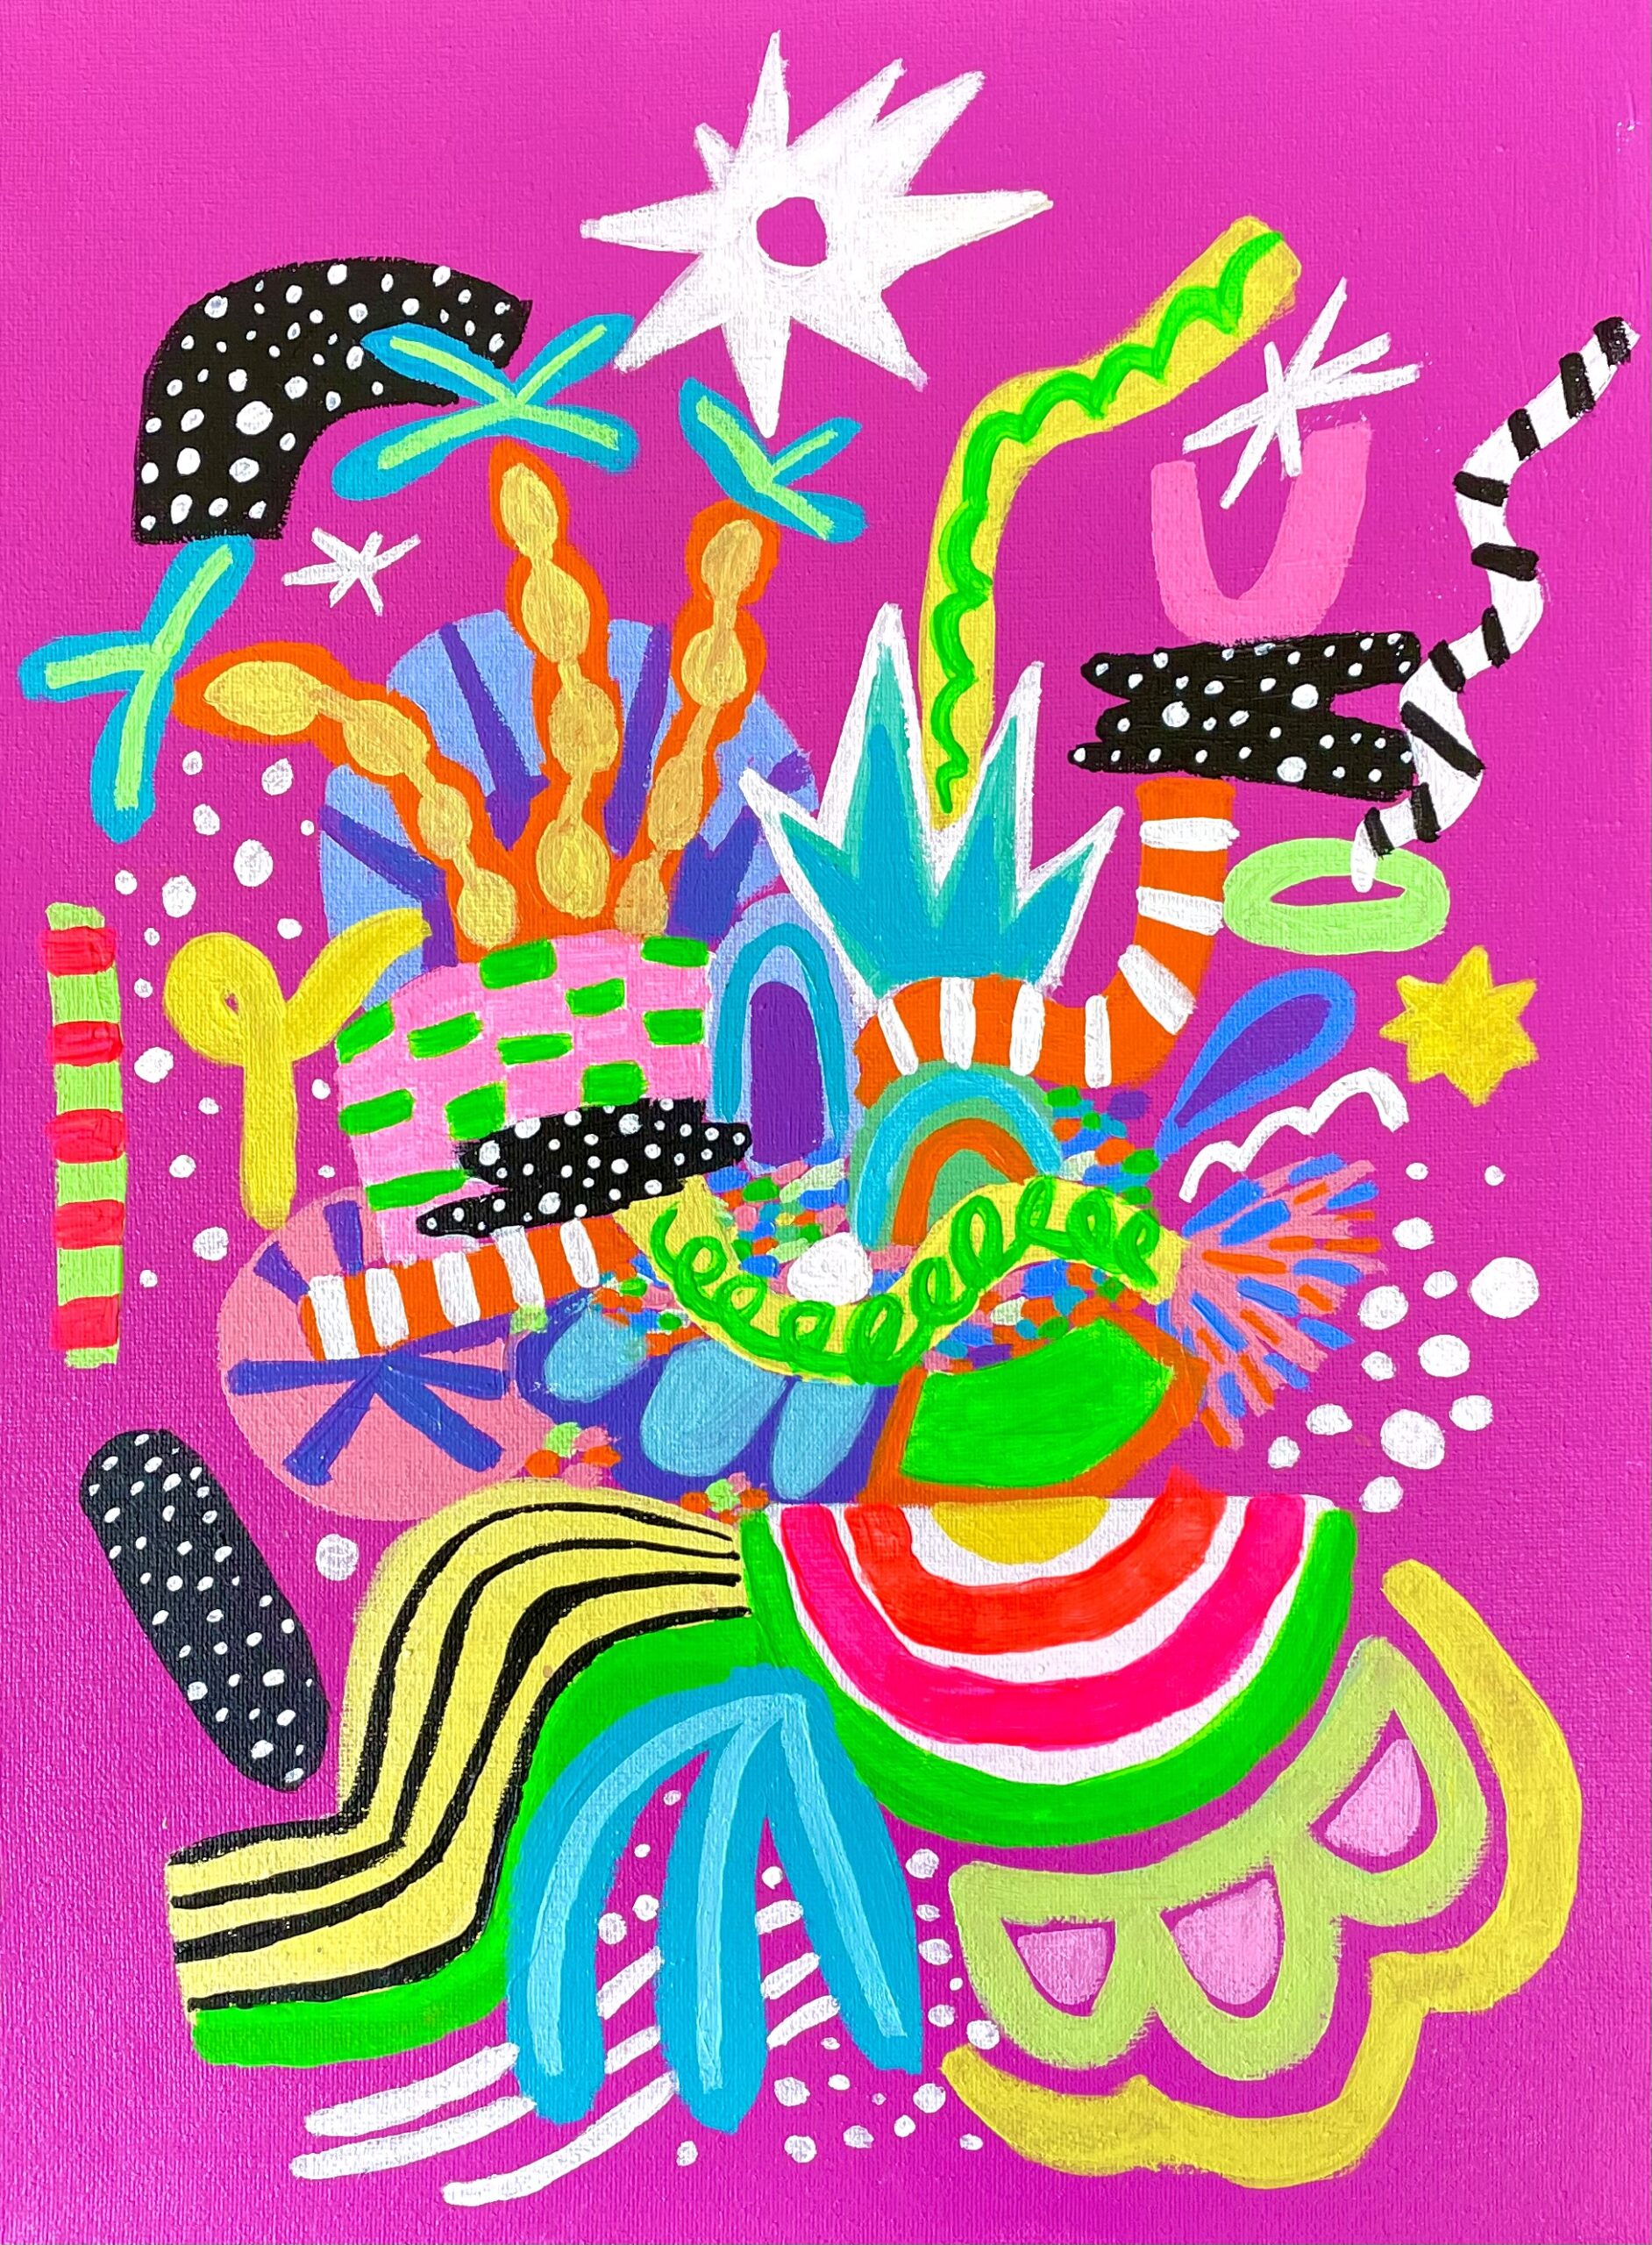 Painting with bright pink background, featuring vibrant blue, yellow, black, and green shapes